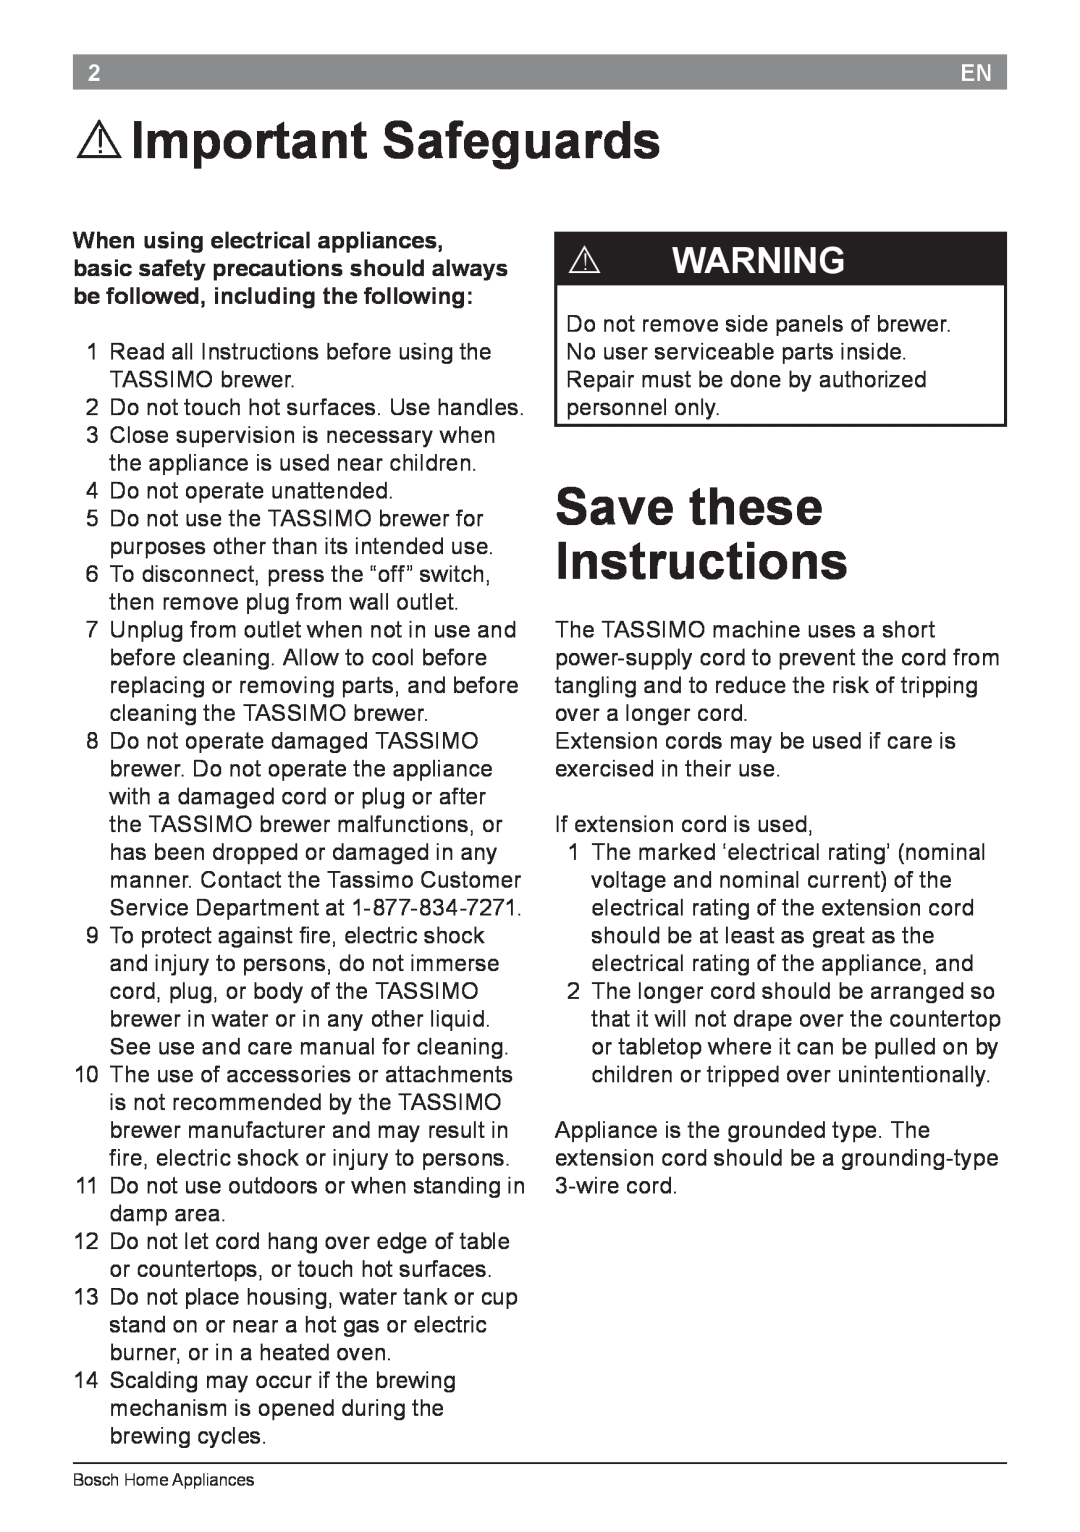 Bosch Appliances T45 instruction manual ! Important Safeguards, Save these Instructions, ! Warning 